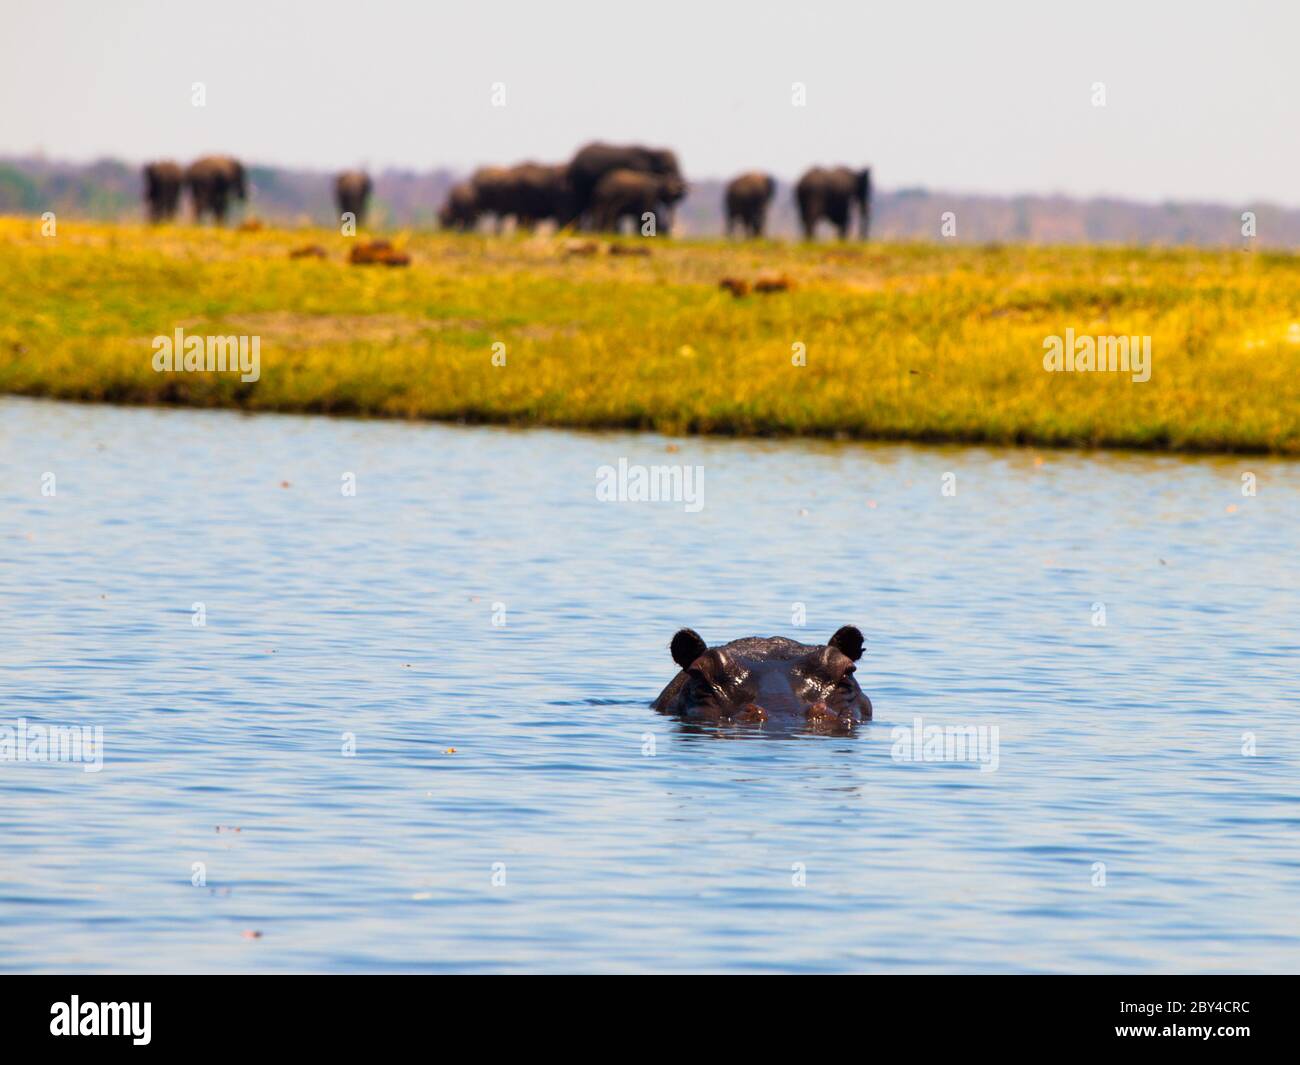 Hippo completely sunk below the river surface. Only eyes and ears are visible. Unfocused elephant herd on a background. Stock Photo